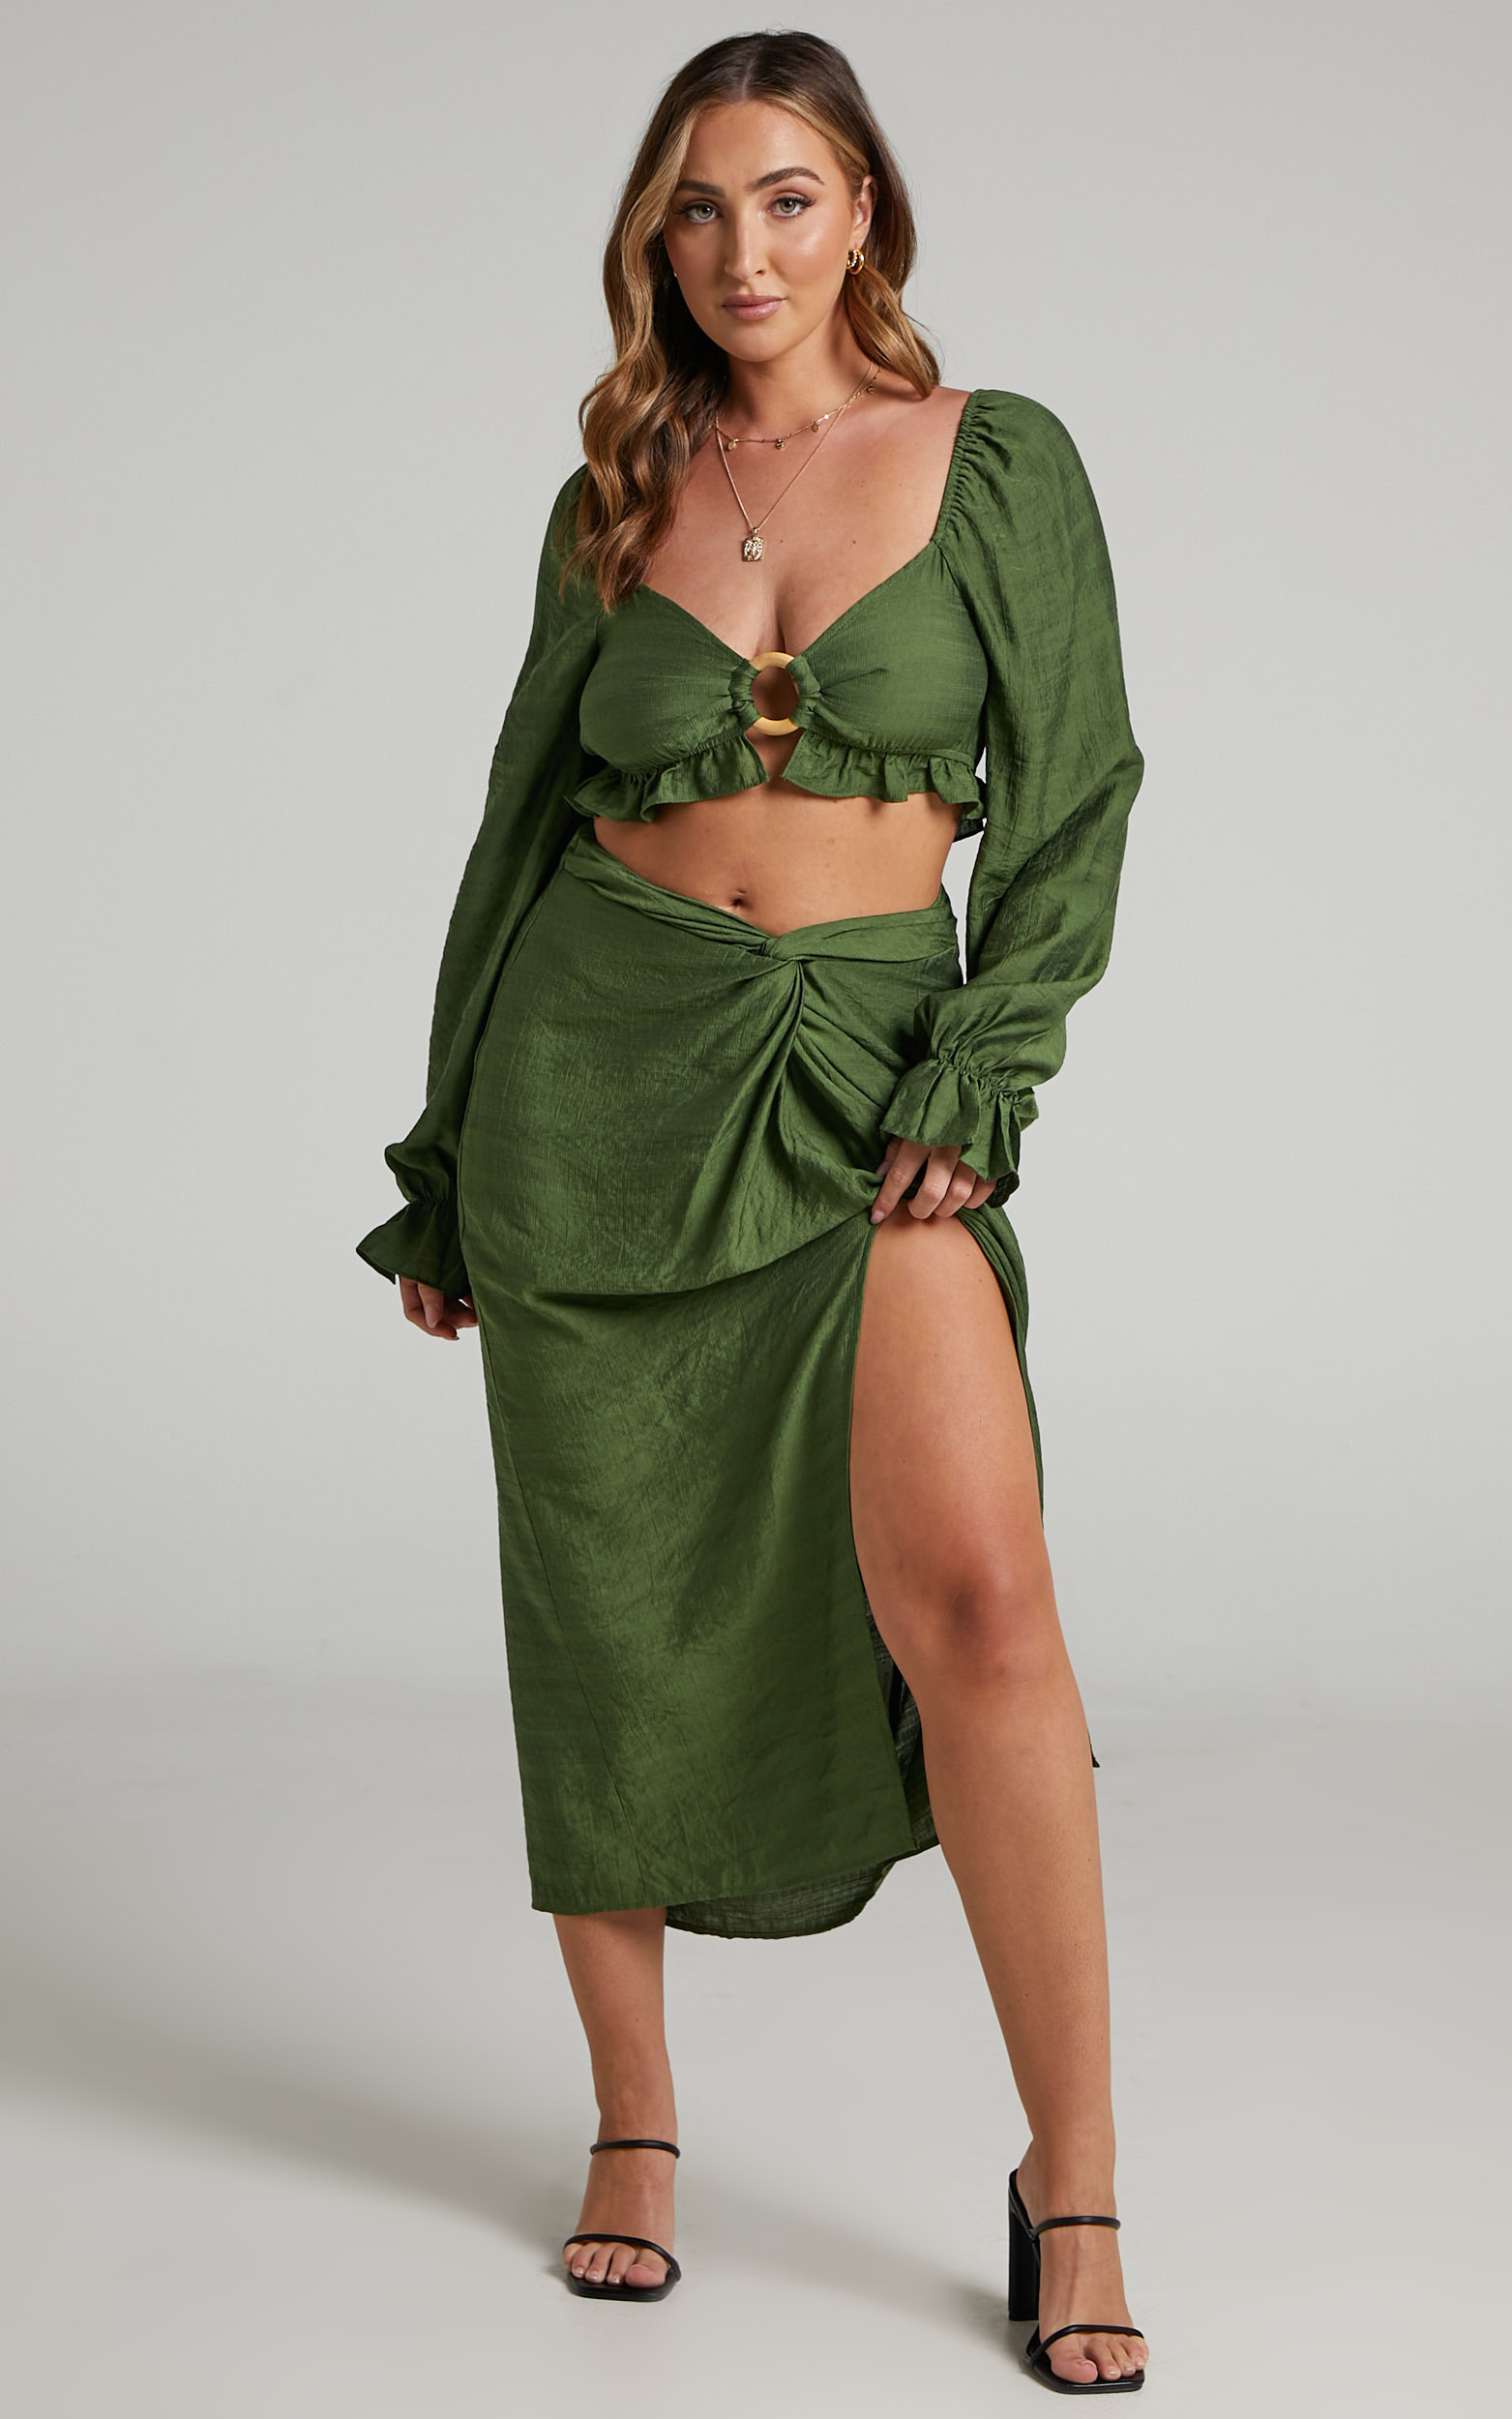 Andalyn Two Piece Knot Front Skirt Set in Olive - 06, GRN1, hi-res image number null